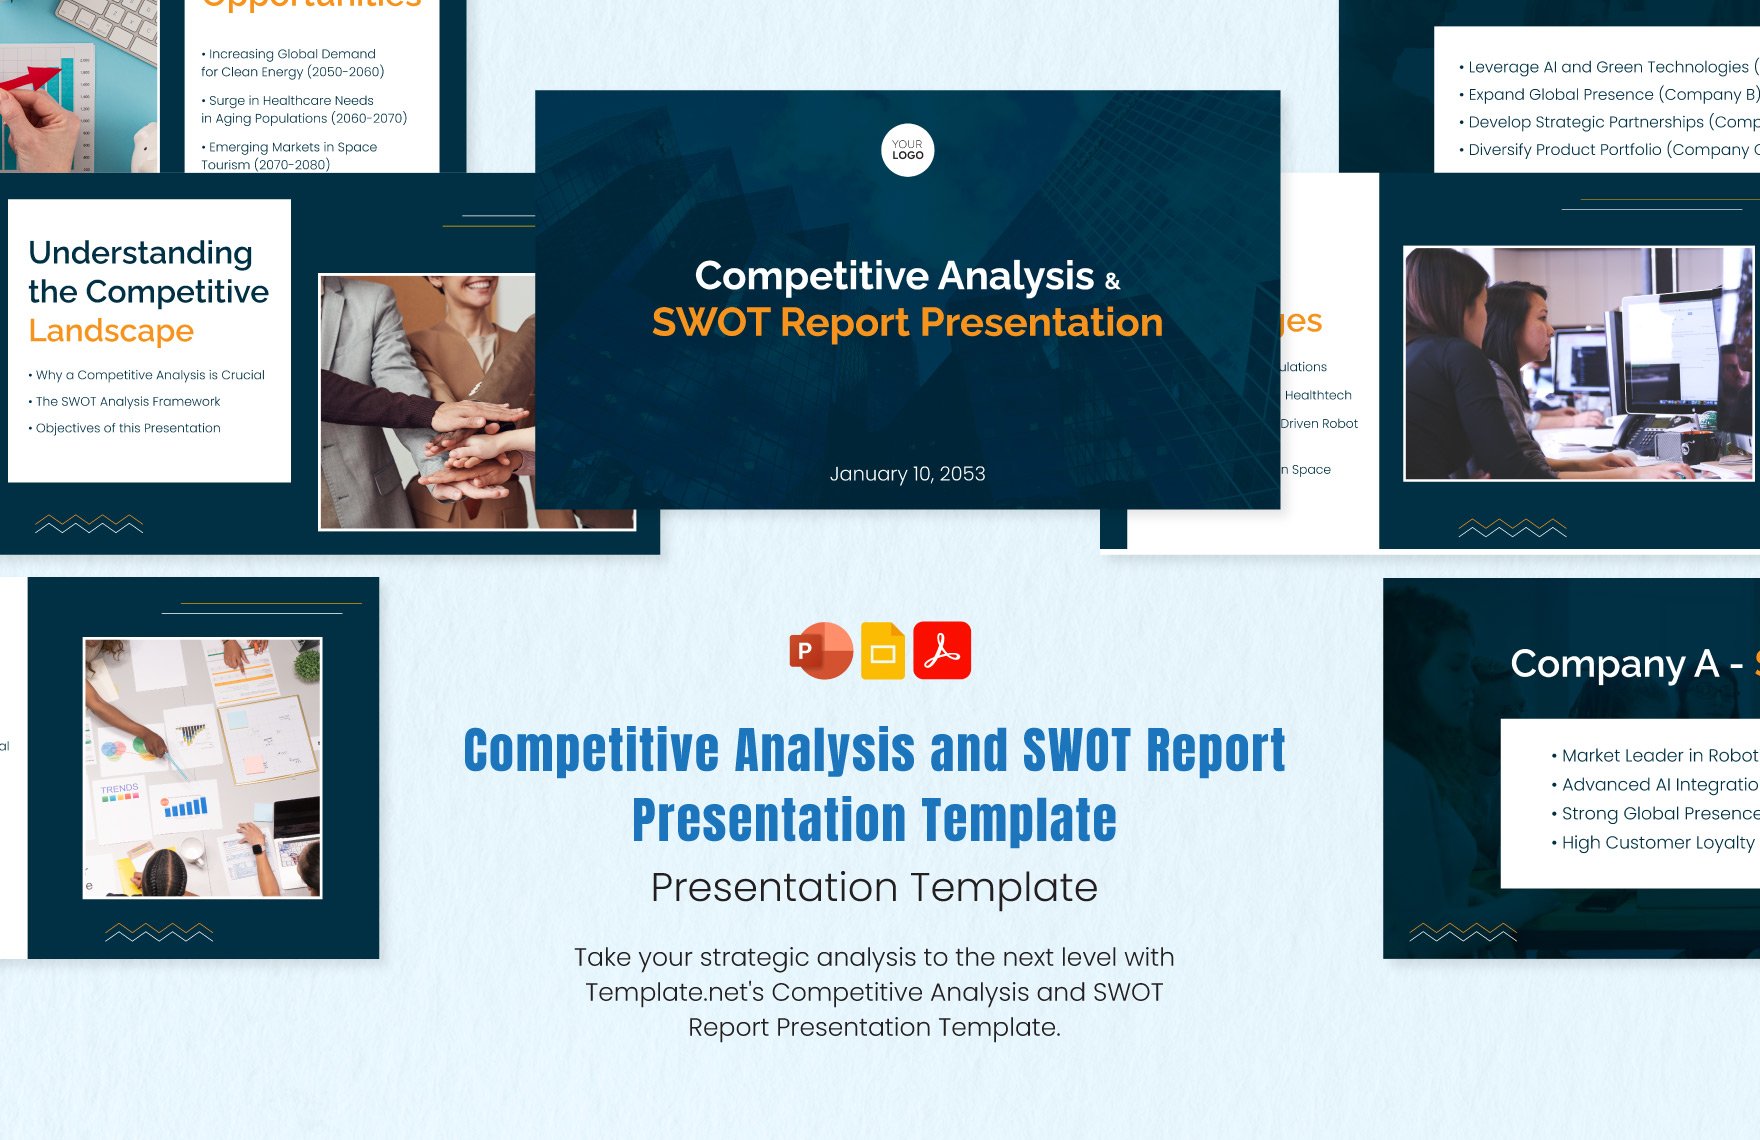 Competitive Analysis and SWOT Report Presentation Template